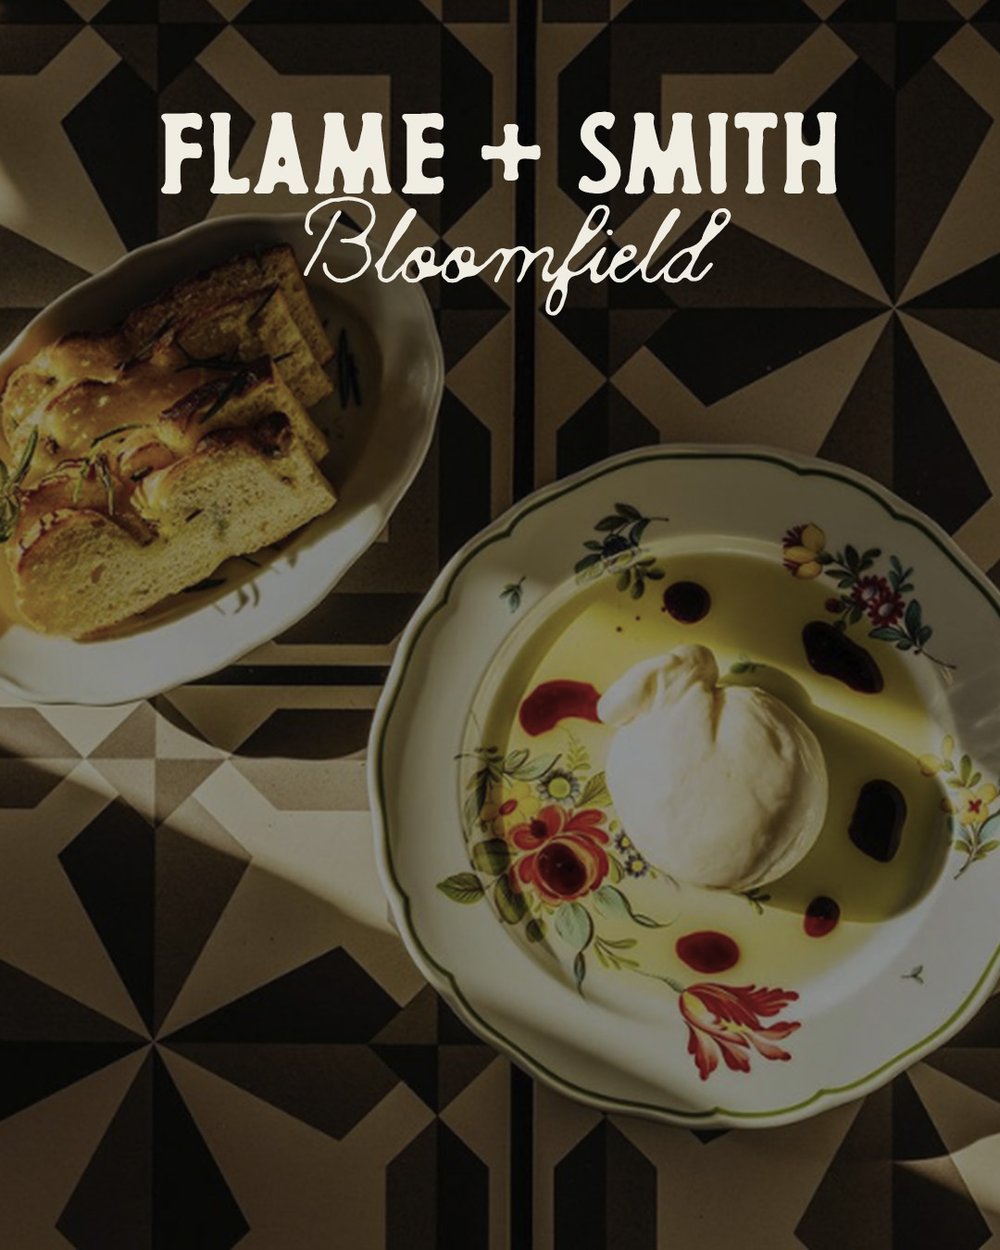 Flame + Smith, Bloomfield